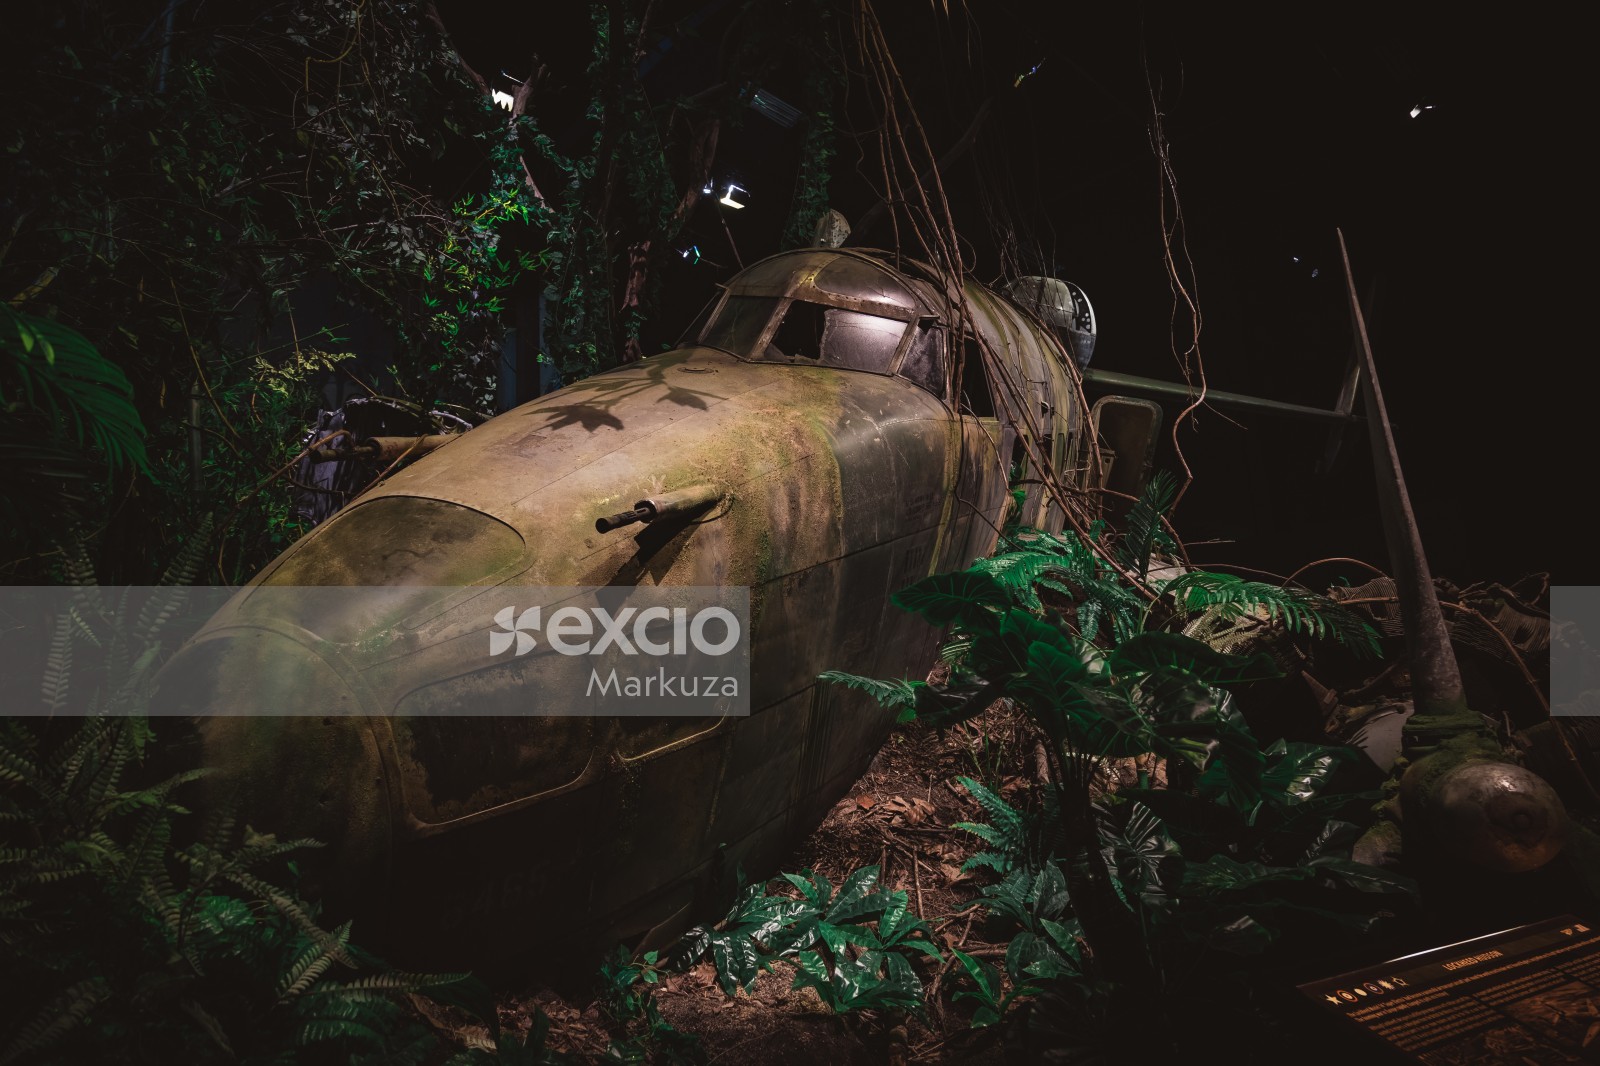 Vintage aircraft in the jungle